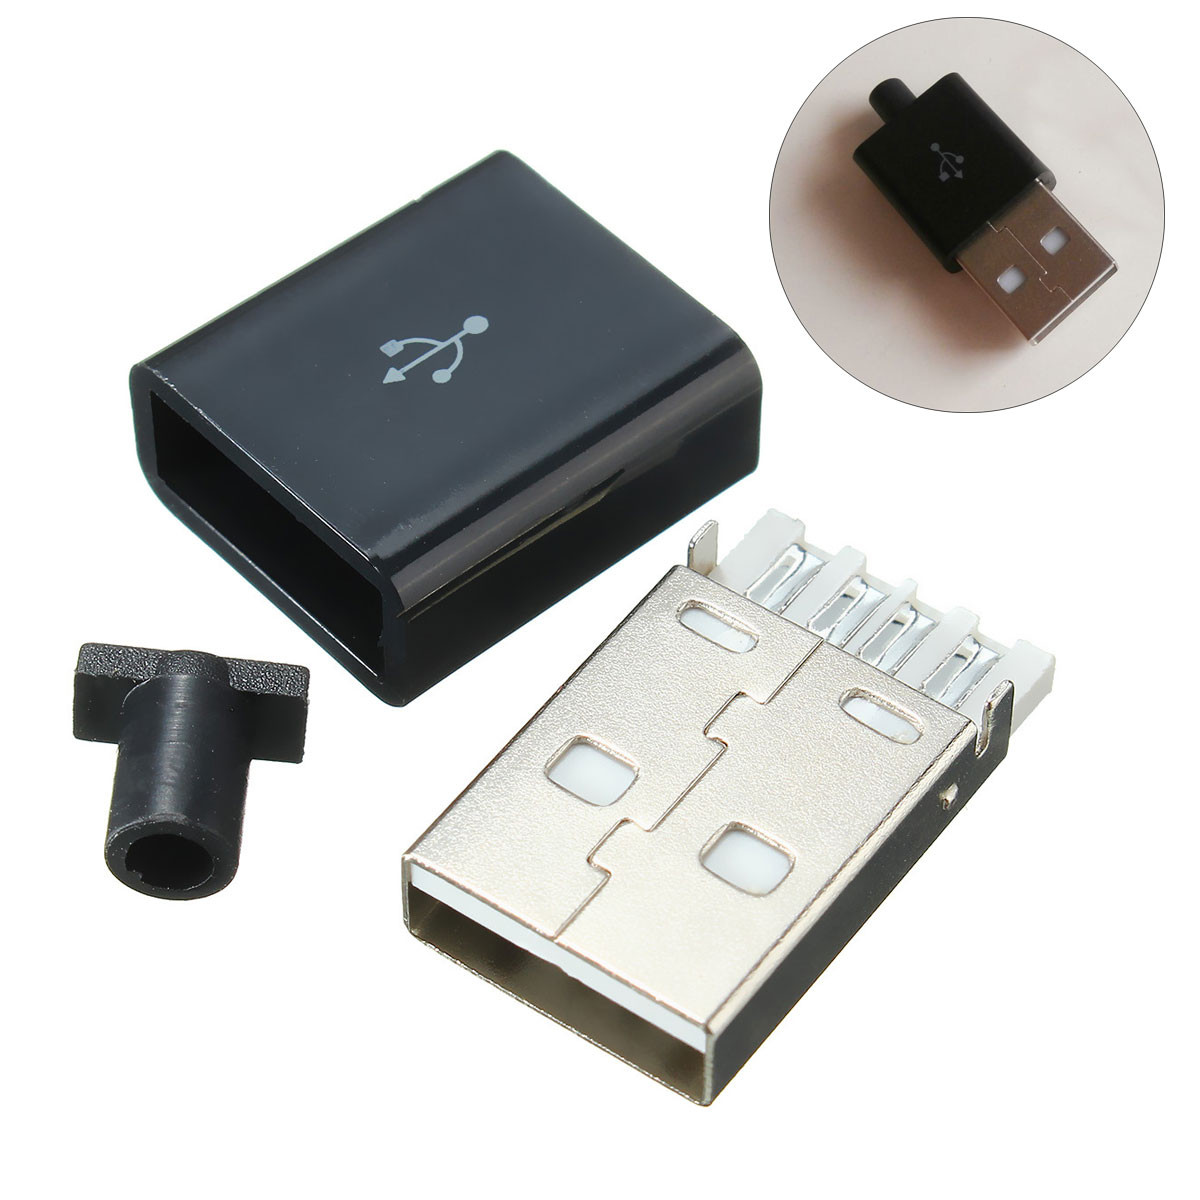 1Pcs-USB-20-Type-A-Plug-4-pin-Male-Adapter-Solder-Connector--Black-Cover-Square-1287374-2